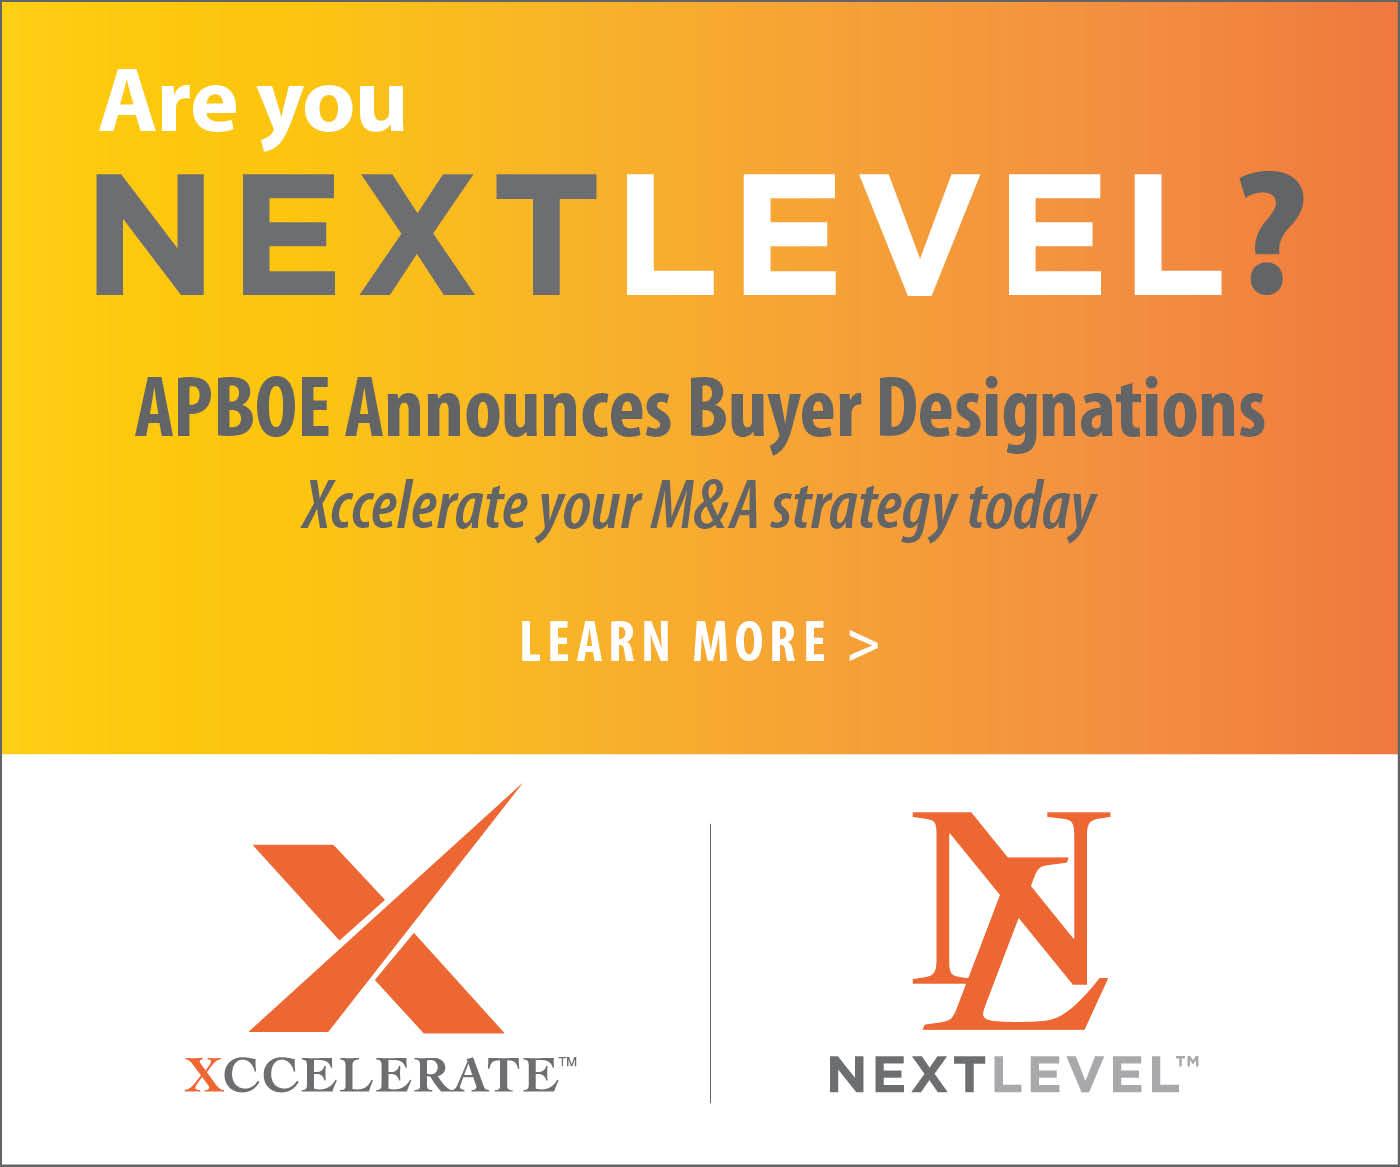 Are you next level? APBOE announces buyer designations - Xccelerate your M&A strategy today. Learn More.